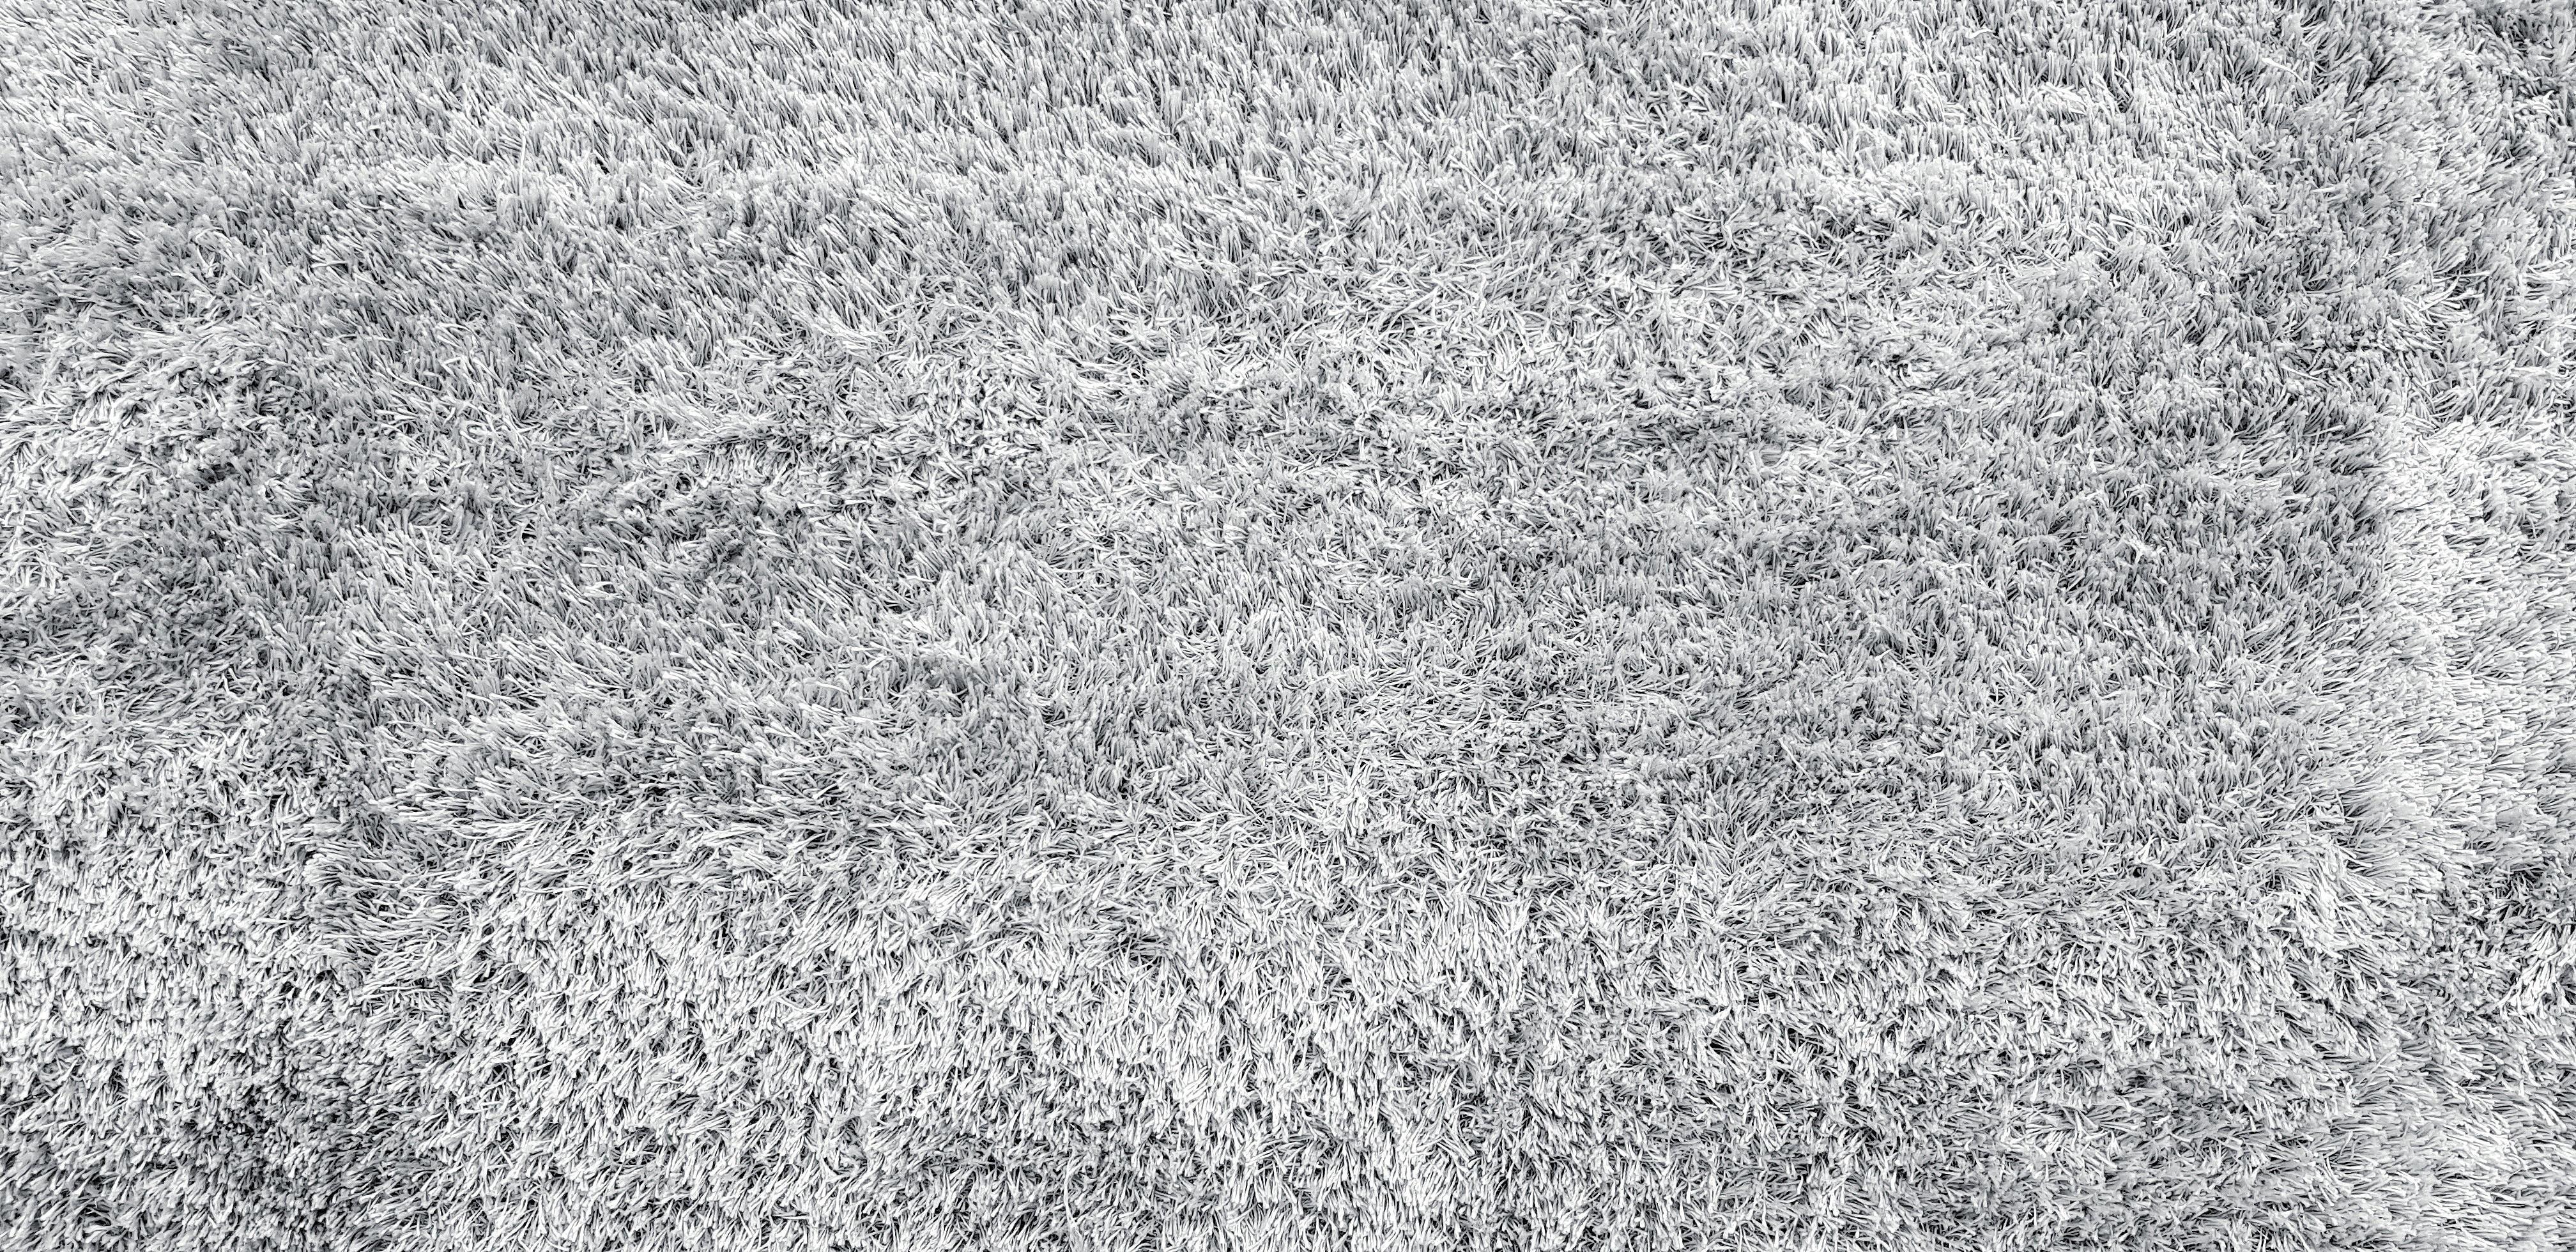 Textured of Gray or Grey wool carpet or rug for background or wallpaper.  Soft material and detail concept 13283038 Stock Photo at Vecteezy